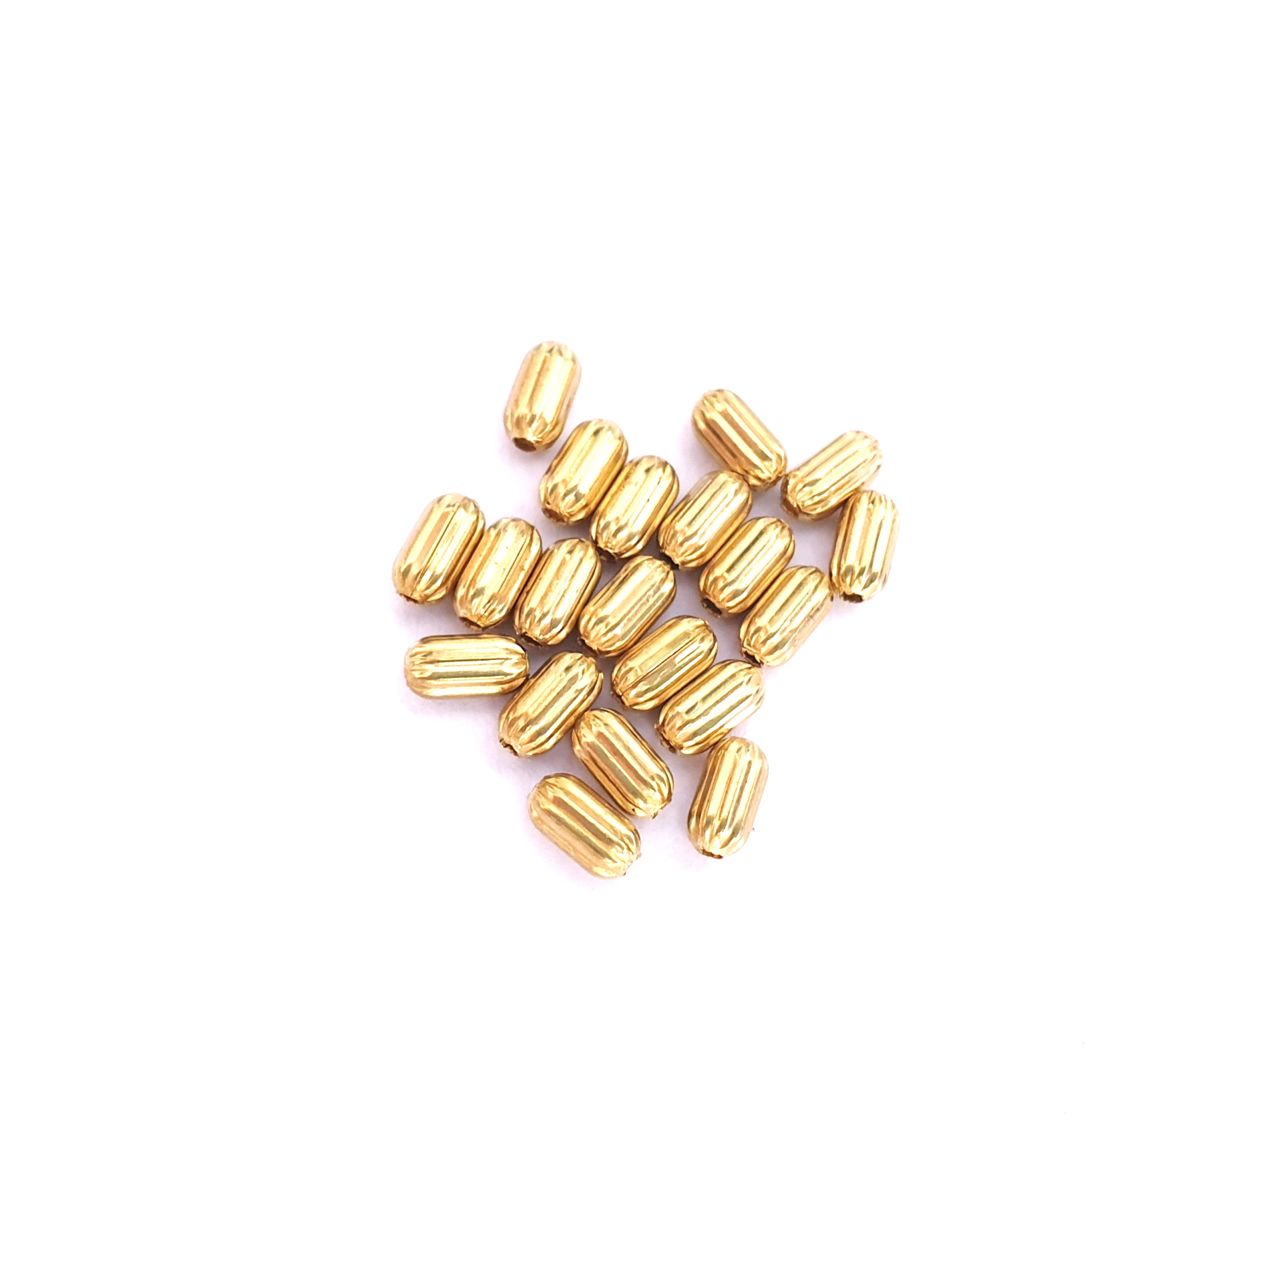 Brass Bead 6x3mm Fluted Capsule